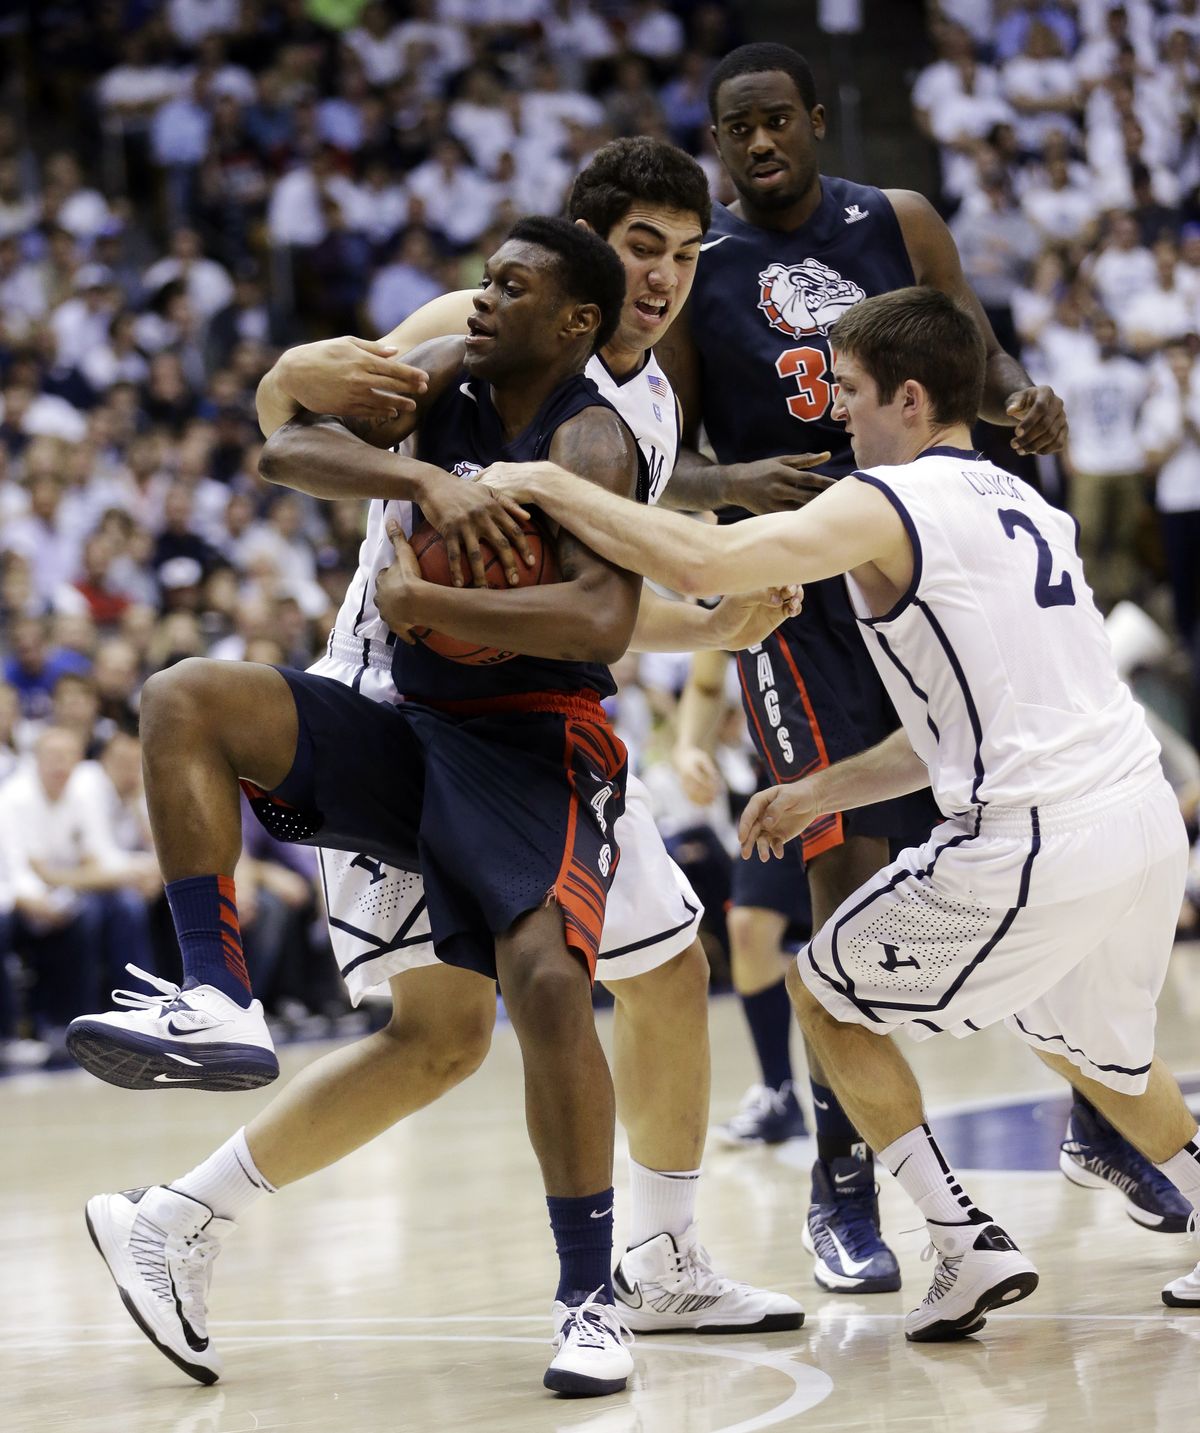 GU’s Gary Bell Jr. is fouled during the win over BYU. (Associated Press)